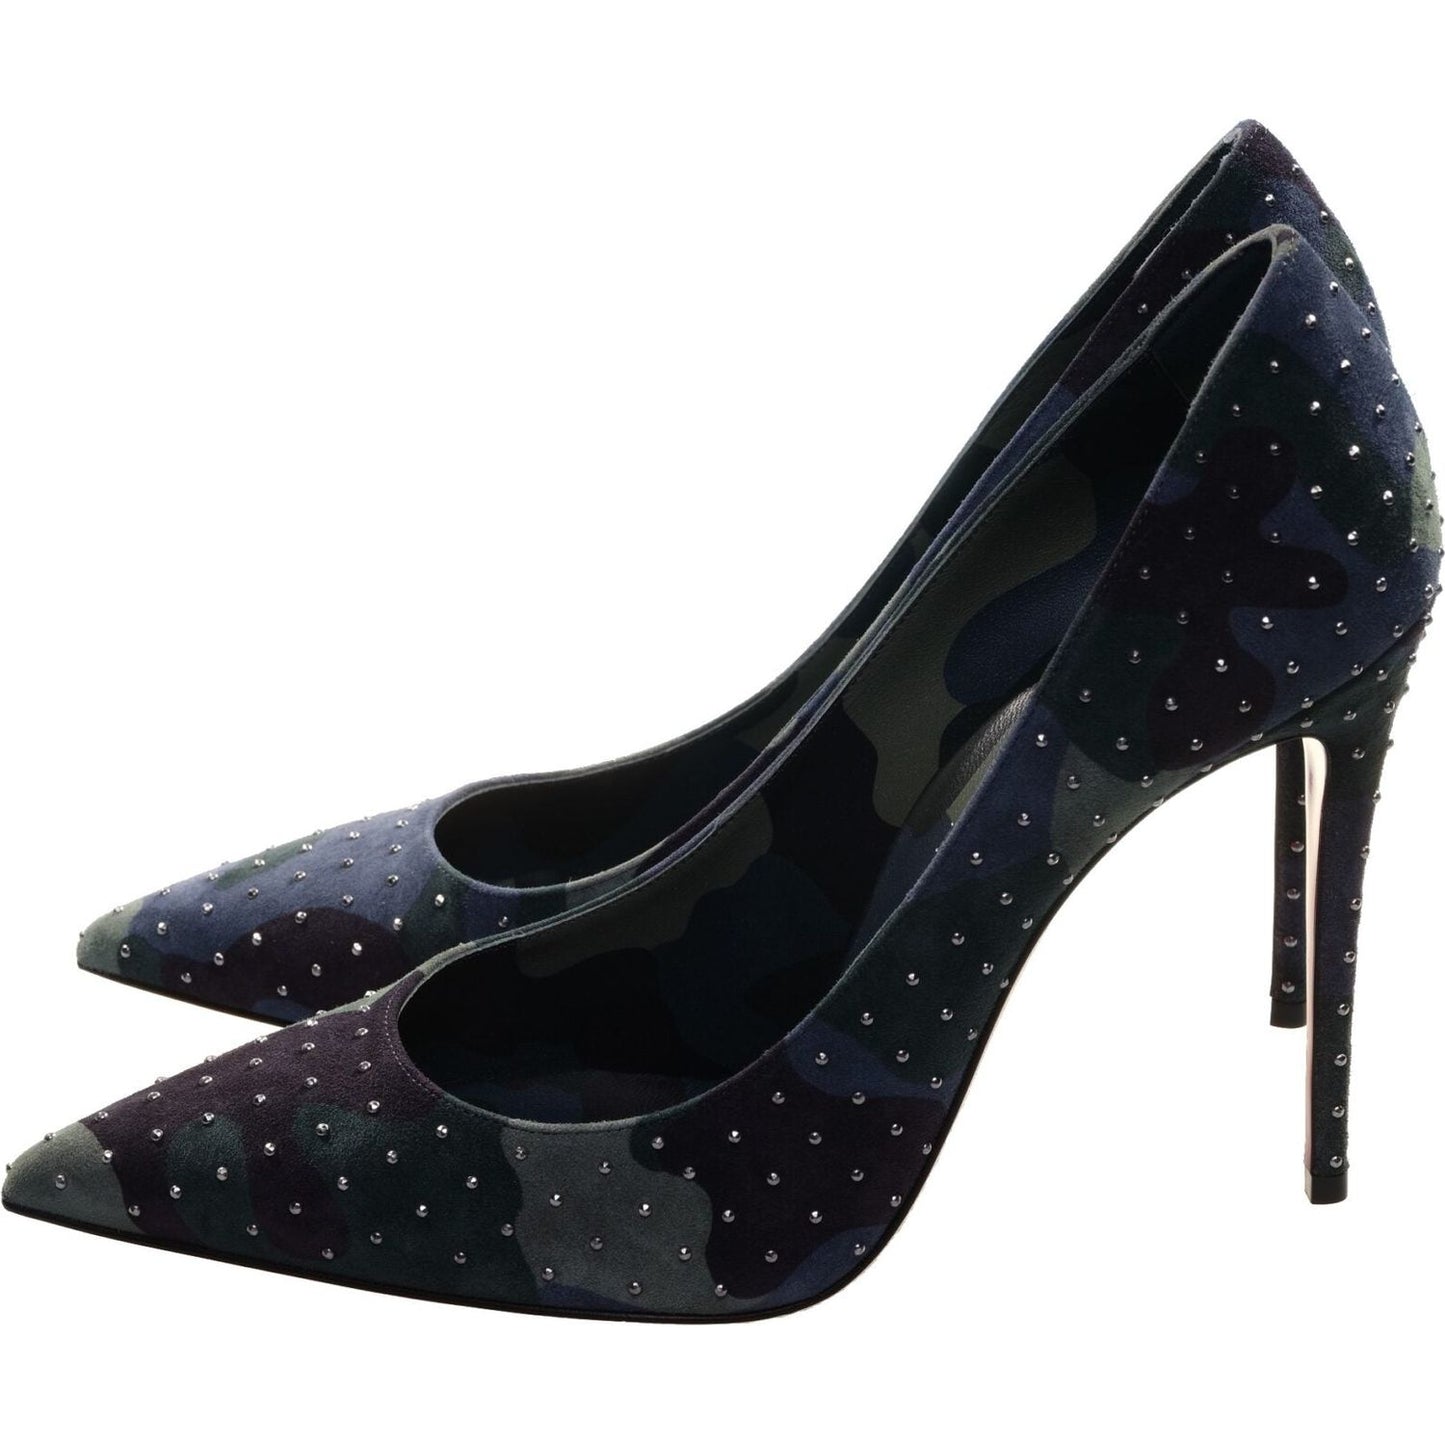 Kate Plume 100 Camouflage and Micro Stud High Heel Pumps